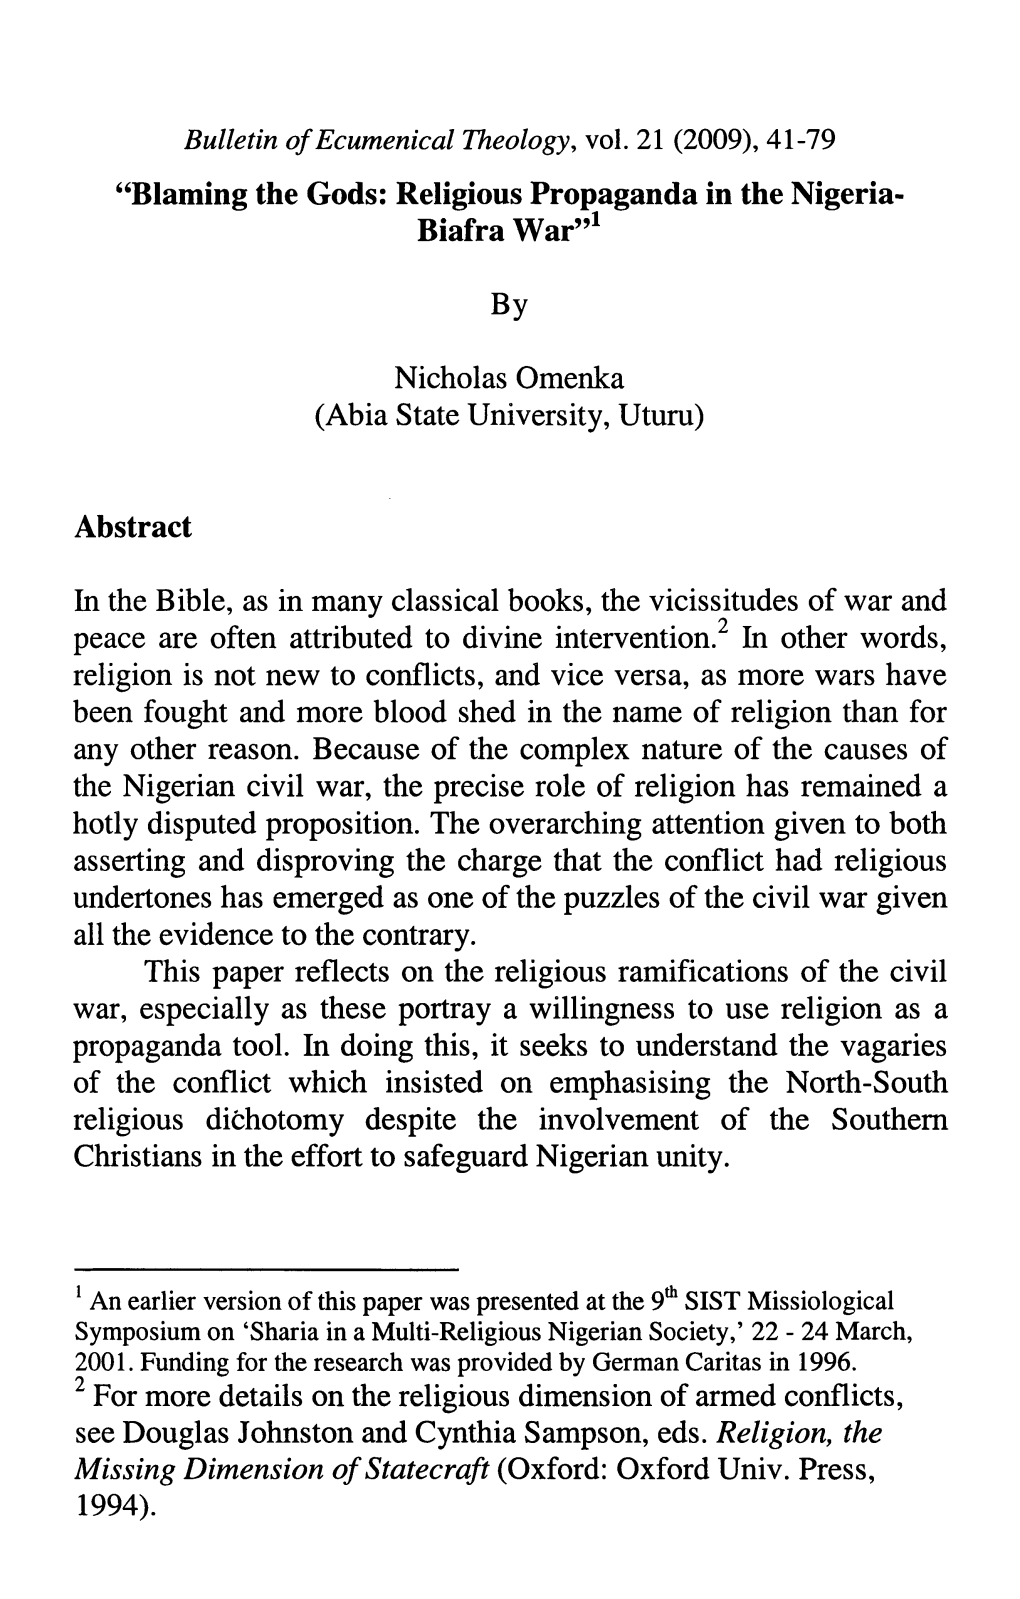 Biafra War"L Peace Are Often Attributed to Divine Intervention.' in Other